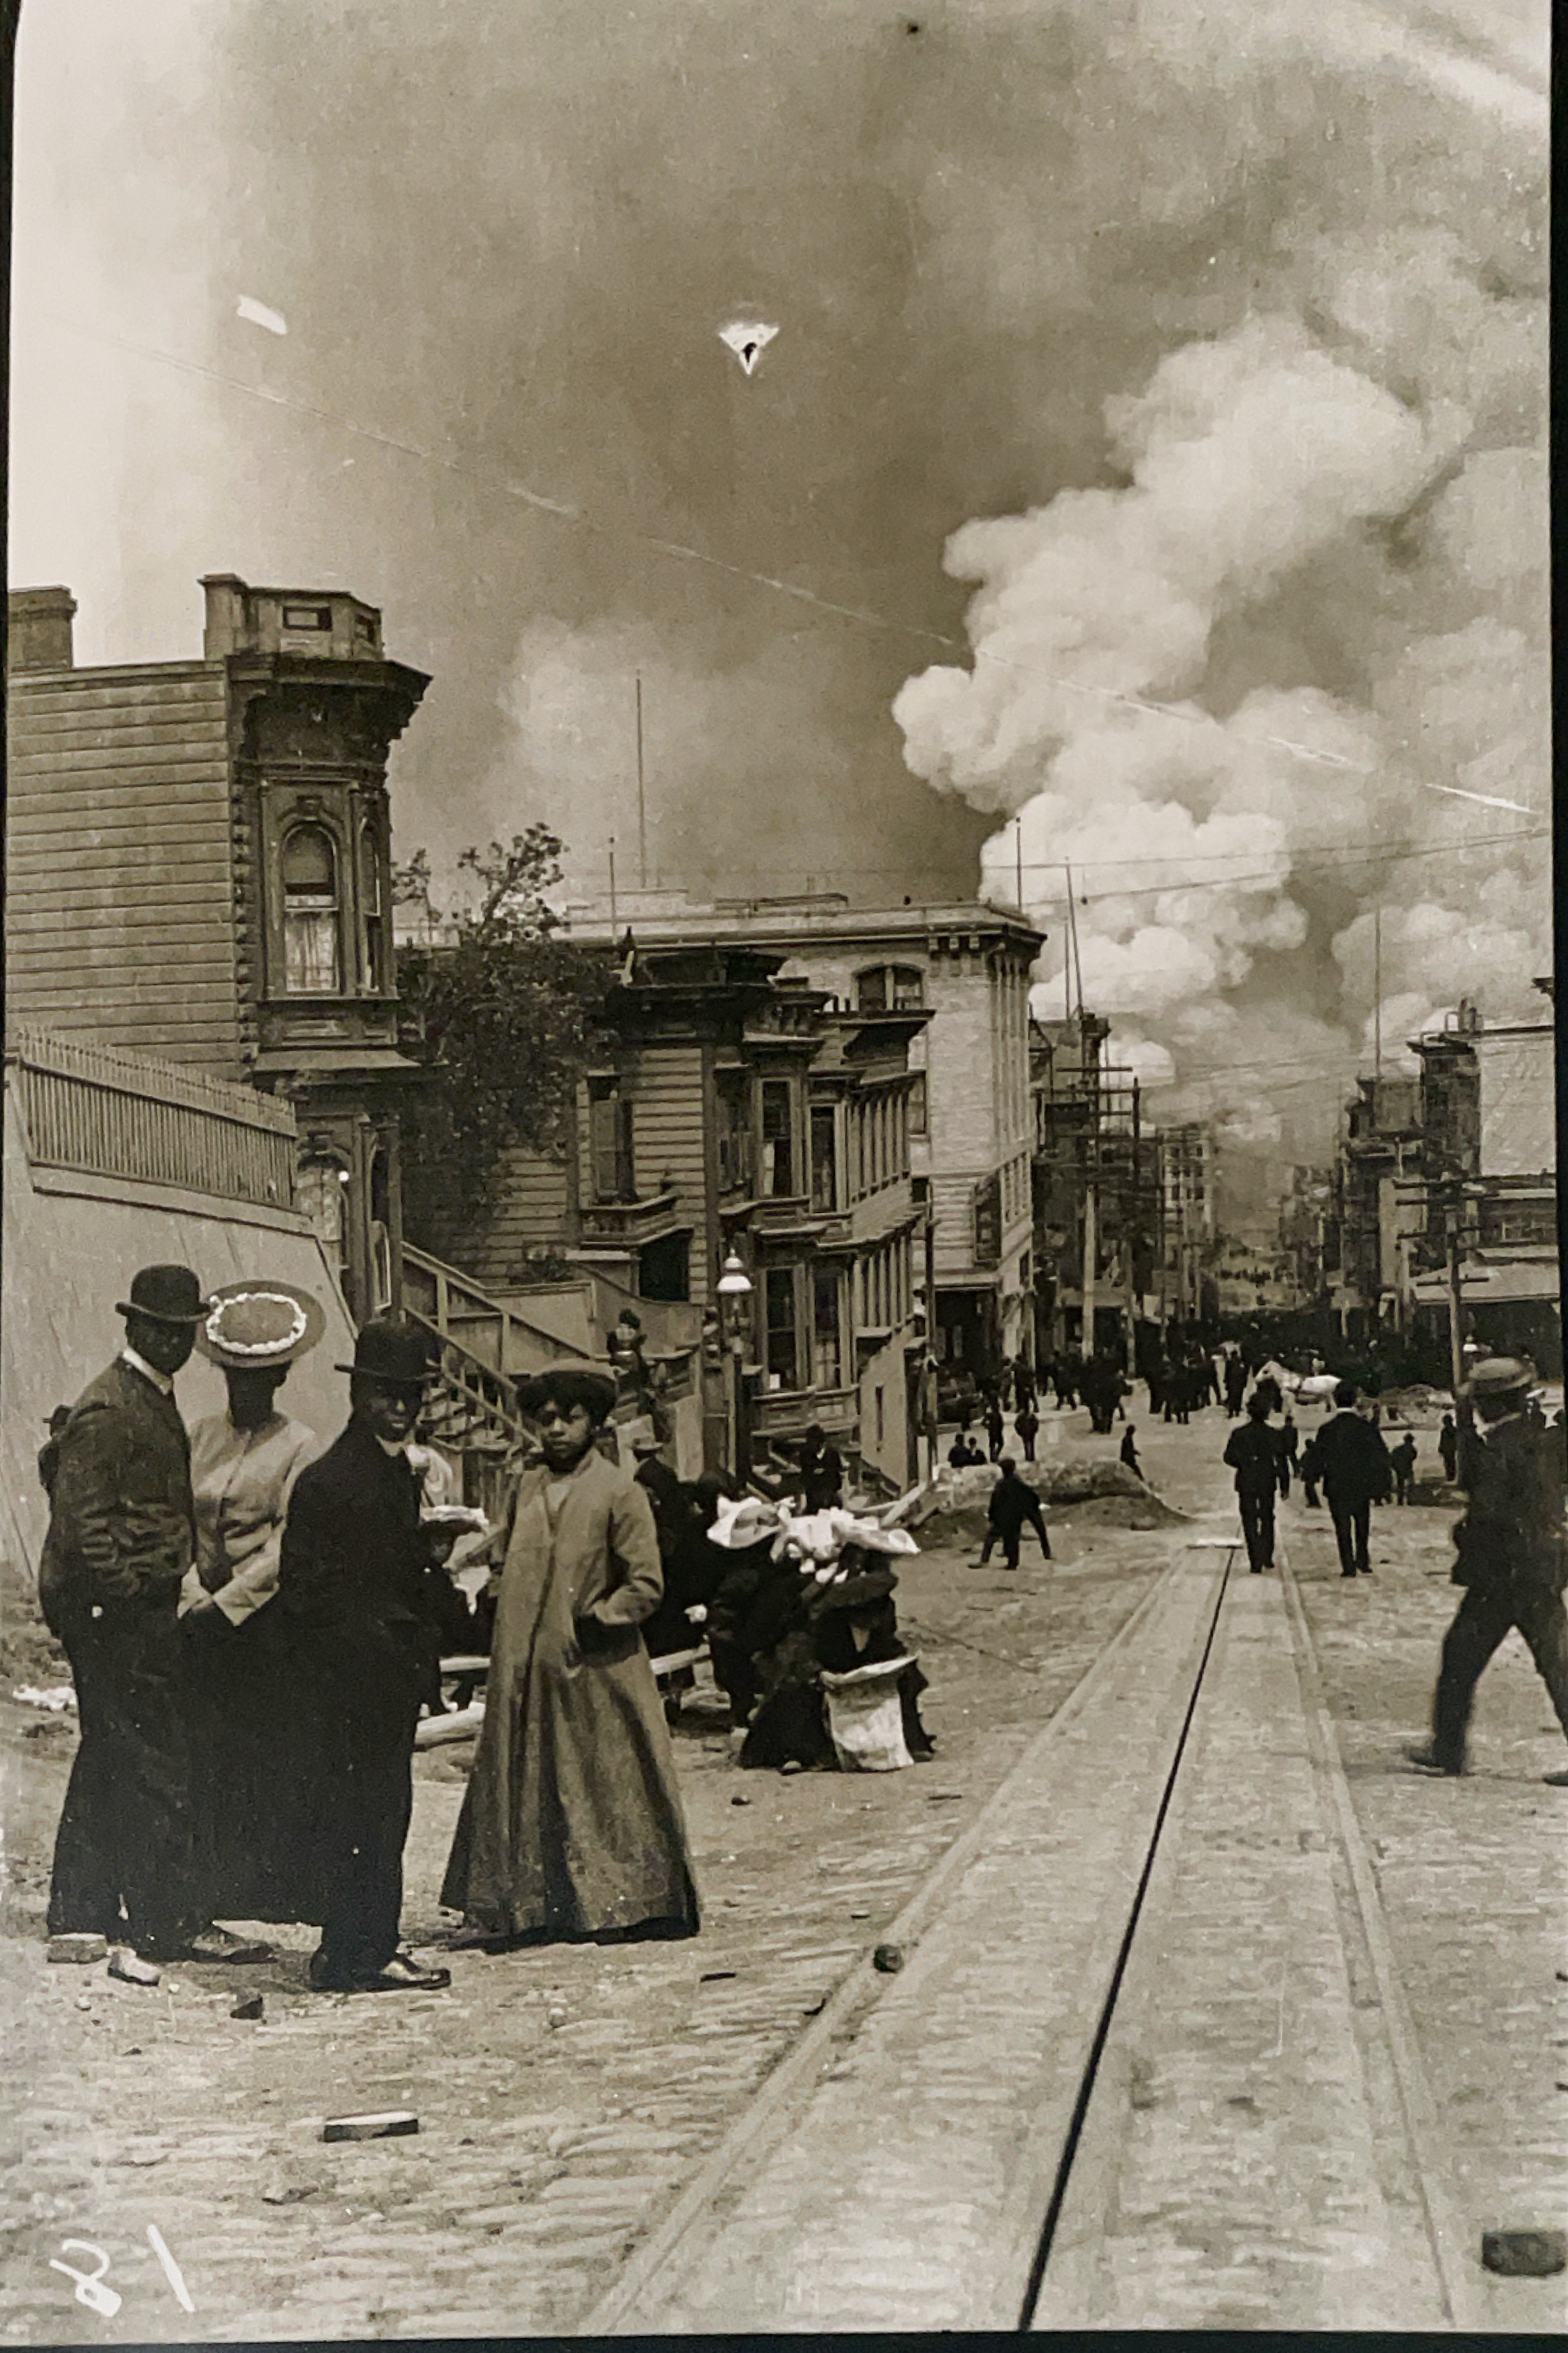 San Francisco residents stand on the street in a black and white photo from 1906, just after the earthquake, with large plumes of smoke in the sky.